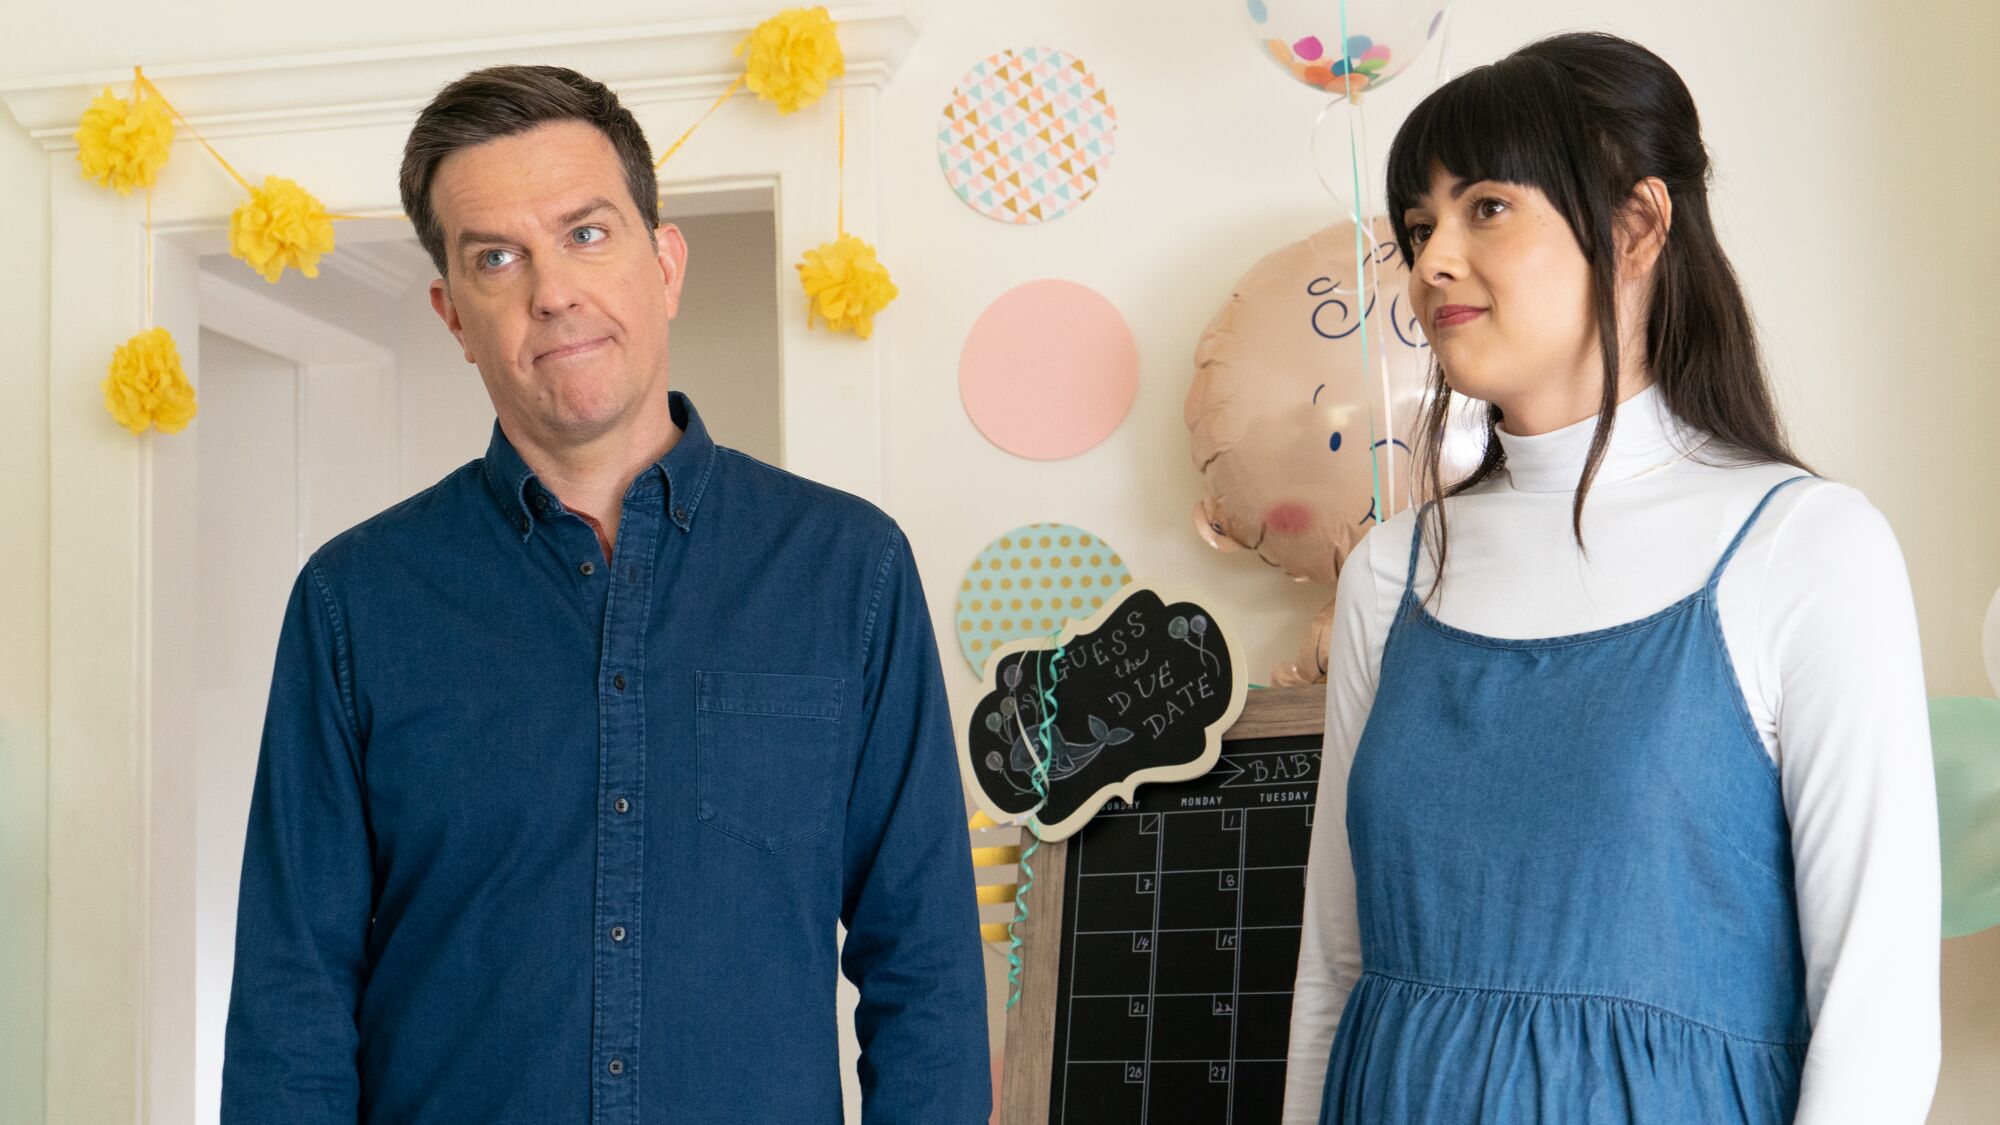 Ed Helms, left, and Patti Harrison in "Together Together," premiering as part of the 2021 Sundance Film Festival.